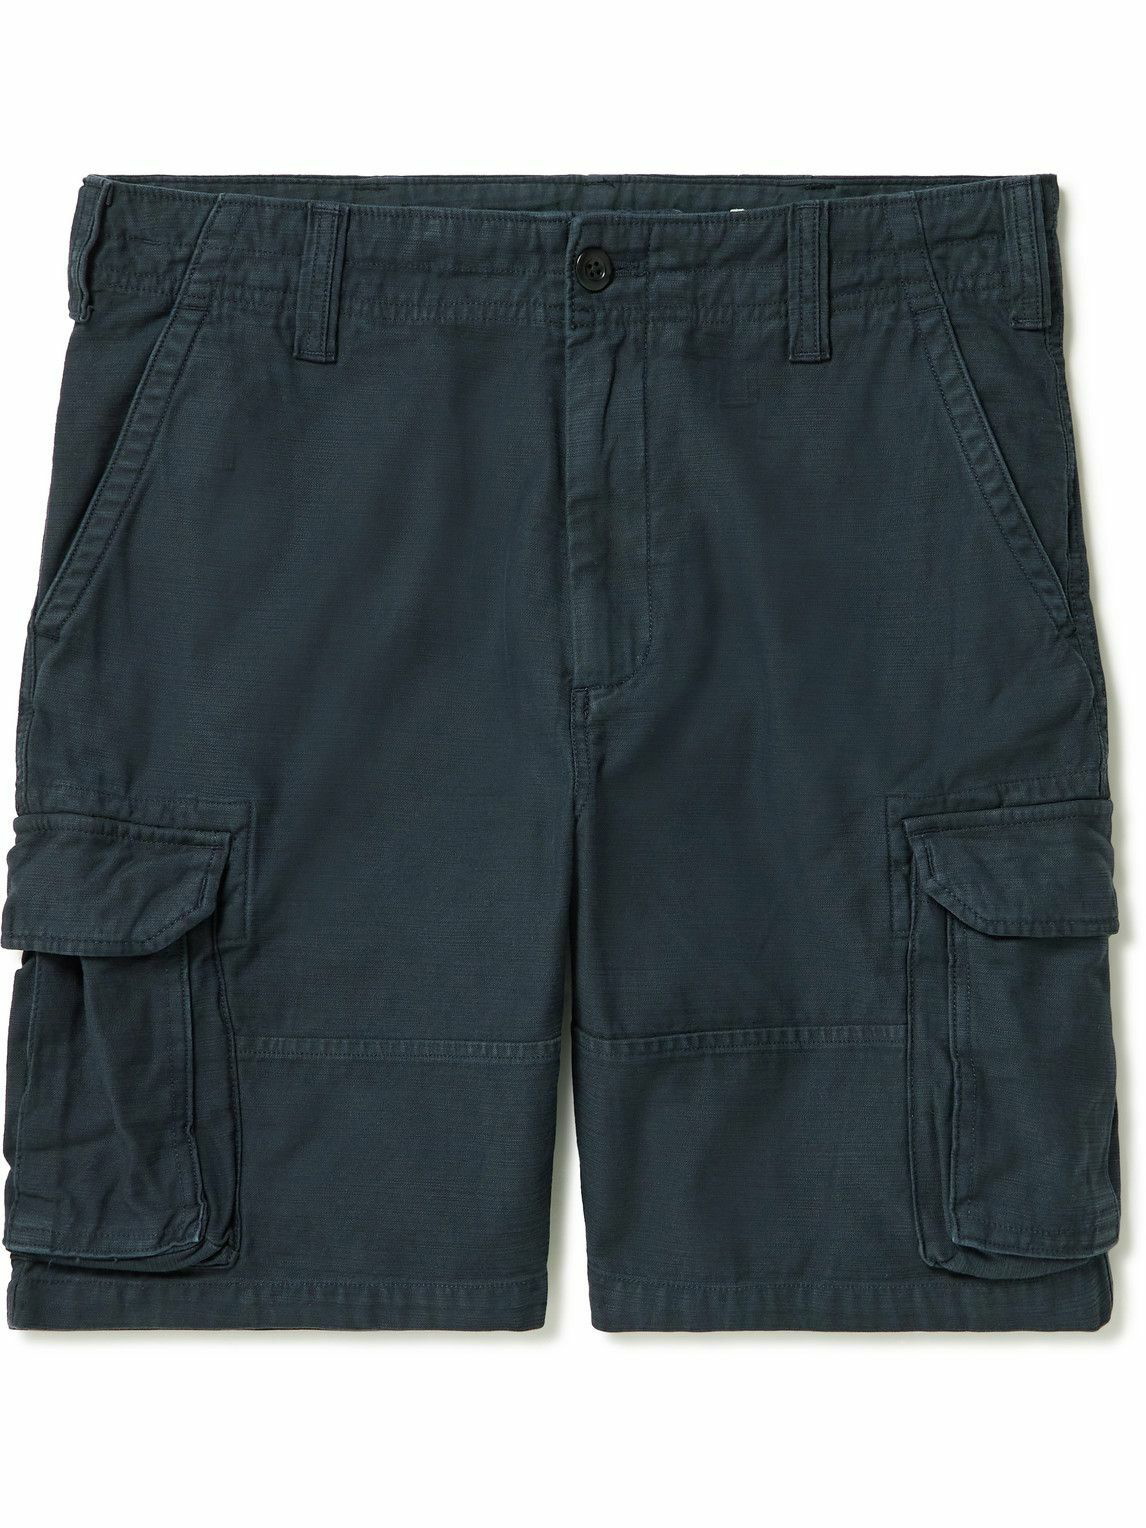 Photo: Outerknown - Voyager Straight-Leg Garment-Dyed Organic Cotton-Twill Cargo Shorts - Black